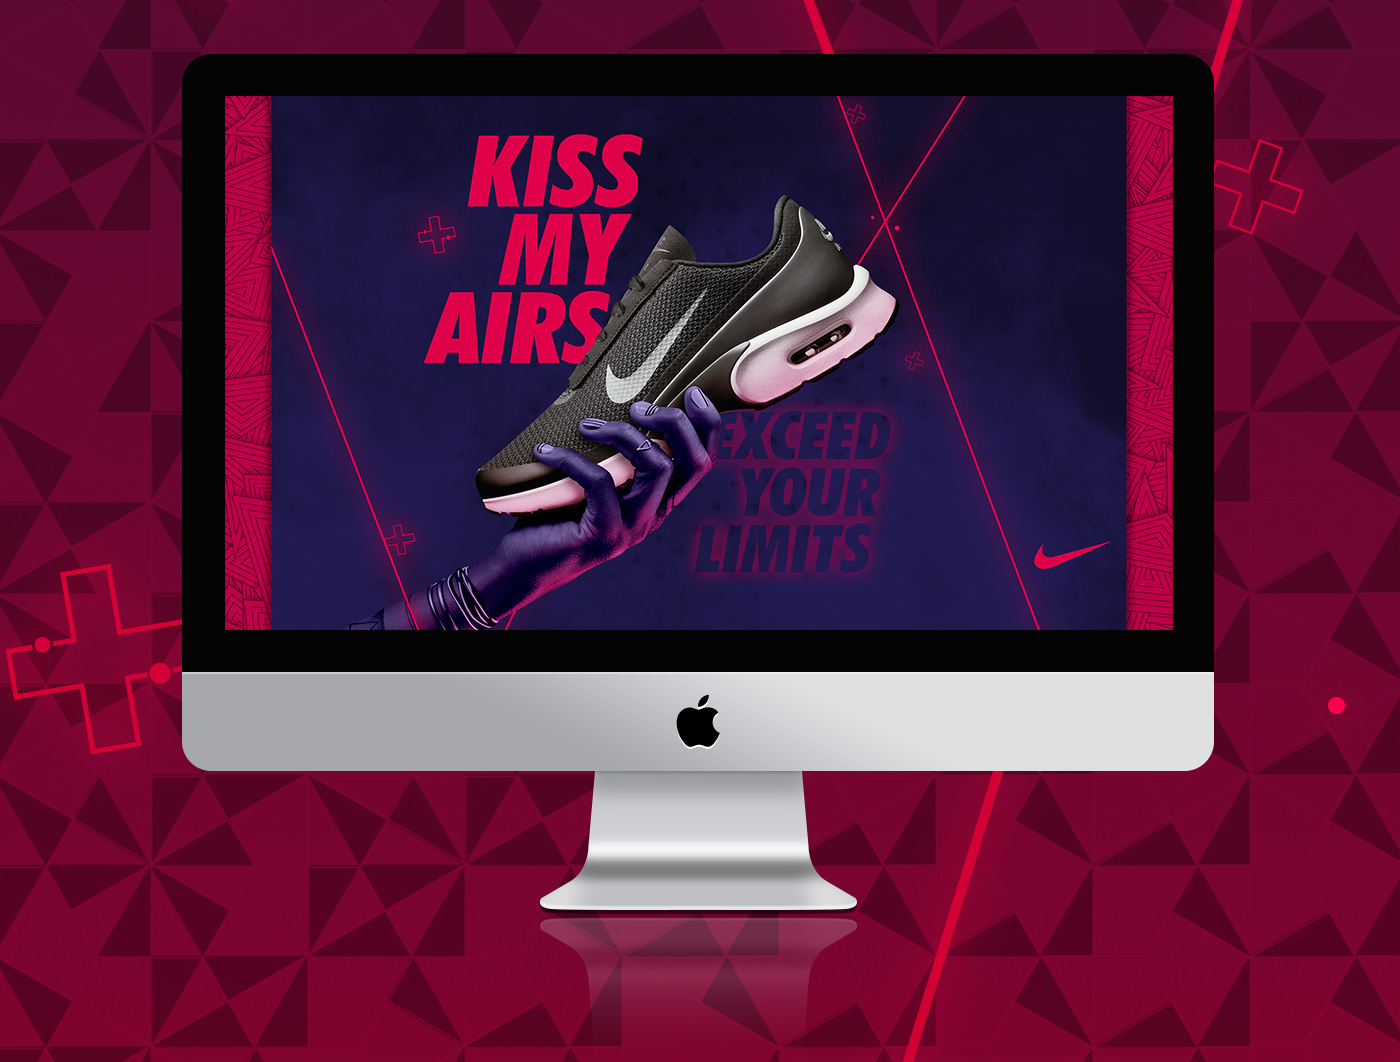 nike shoes kiss my airs projects study purple hands manipulation led neon pink poster social media wallpaper advertising ad propaganda tênis tenis neon air